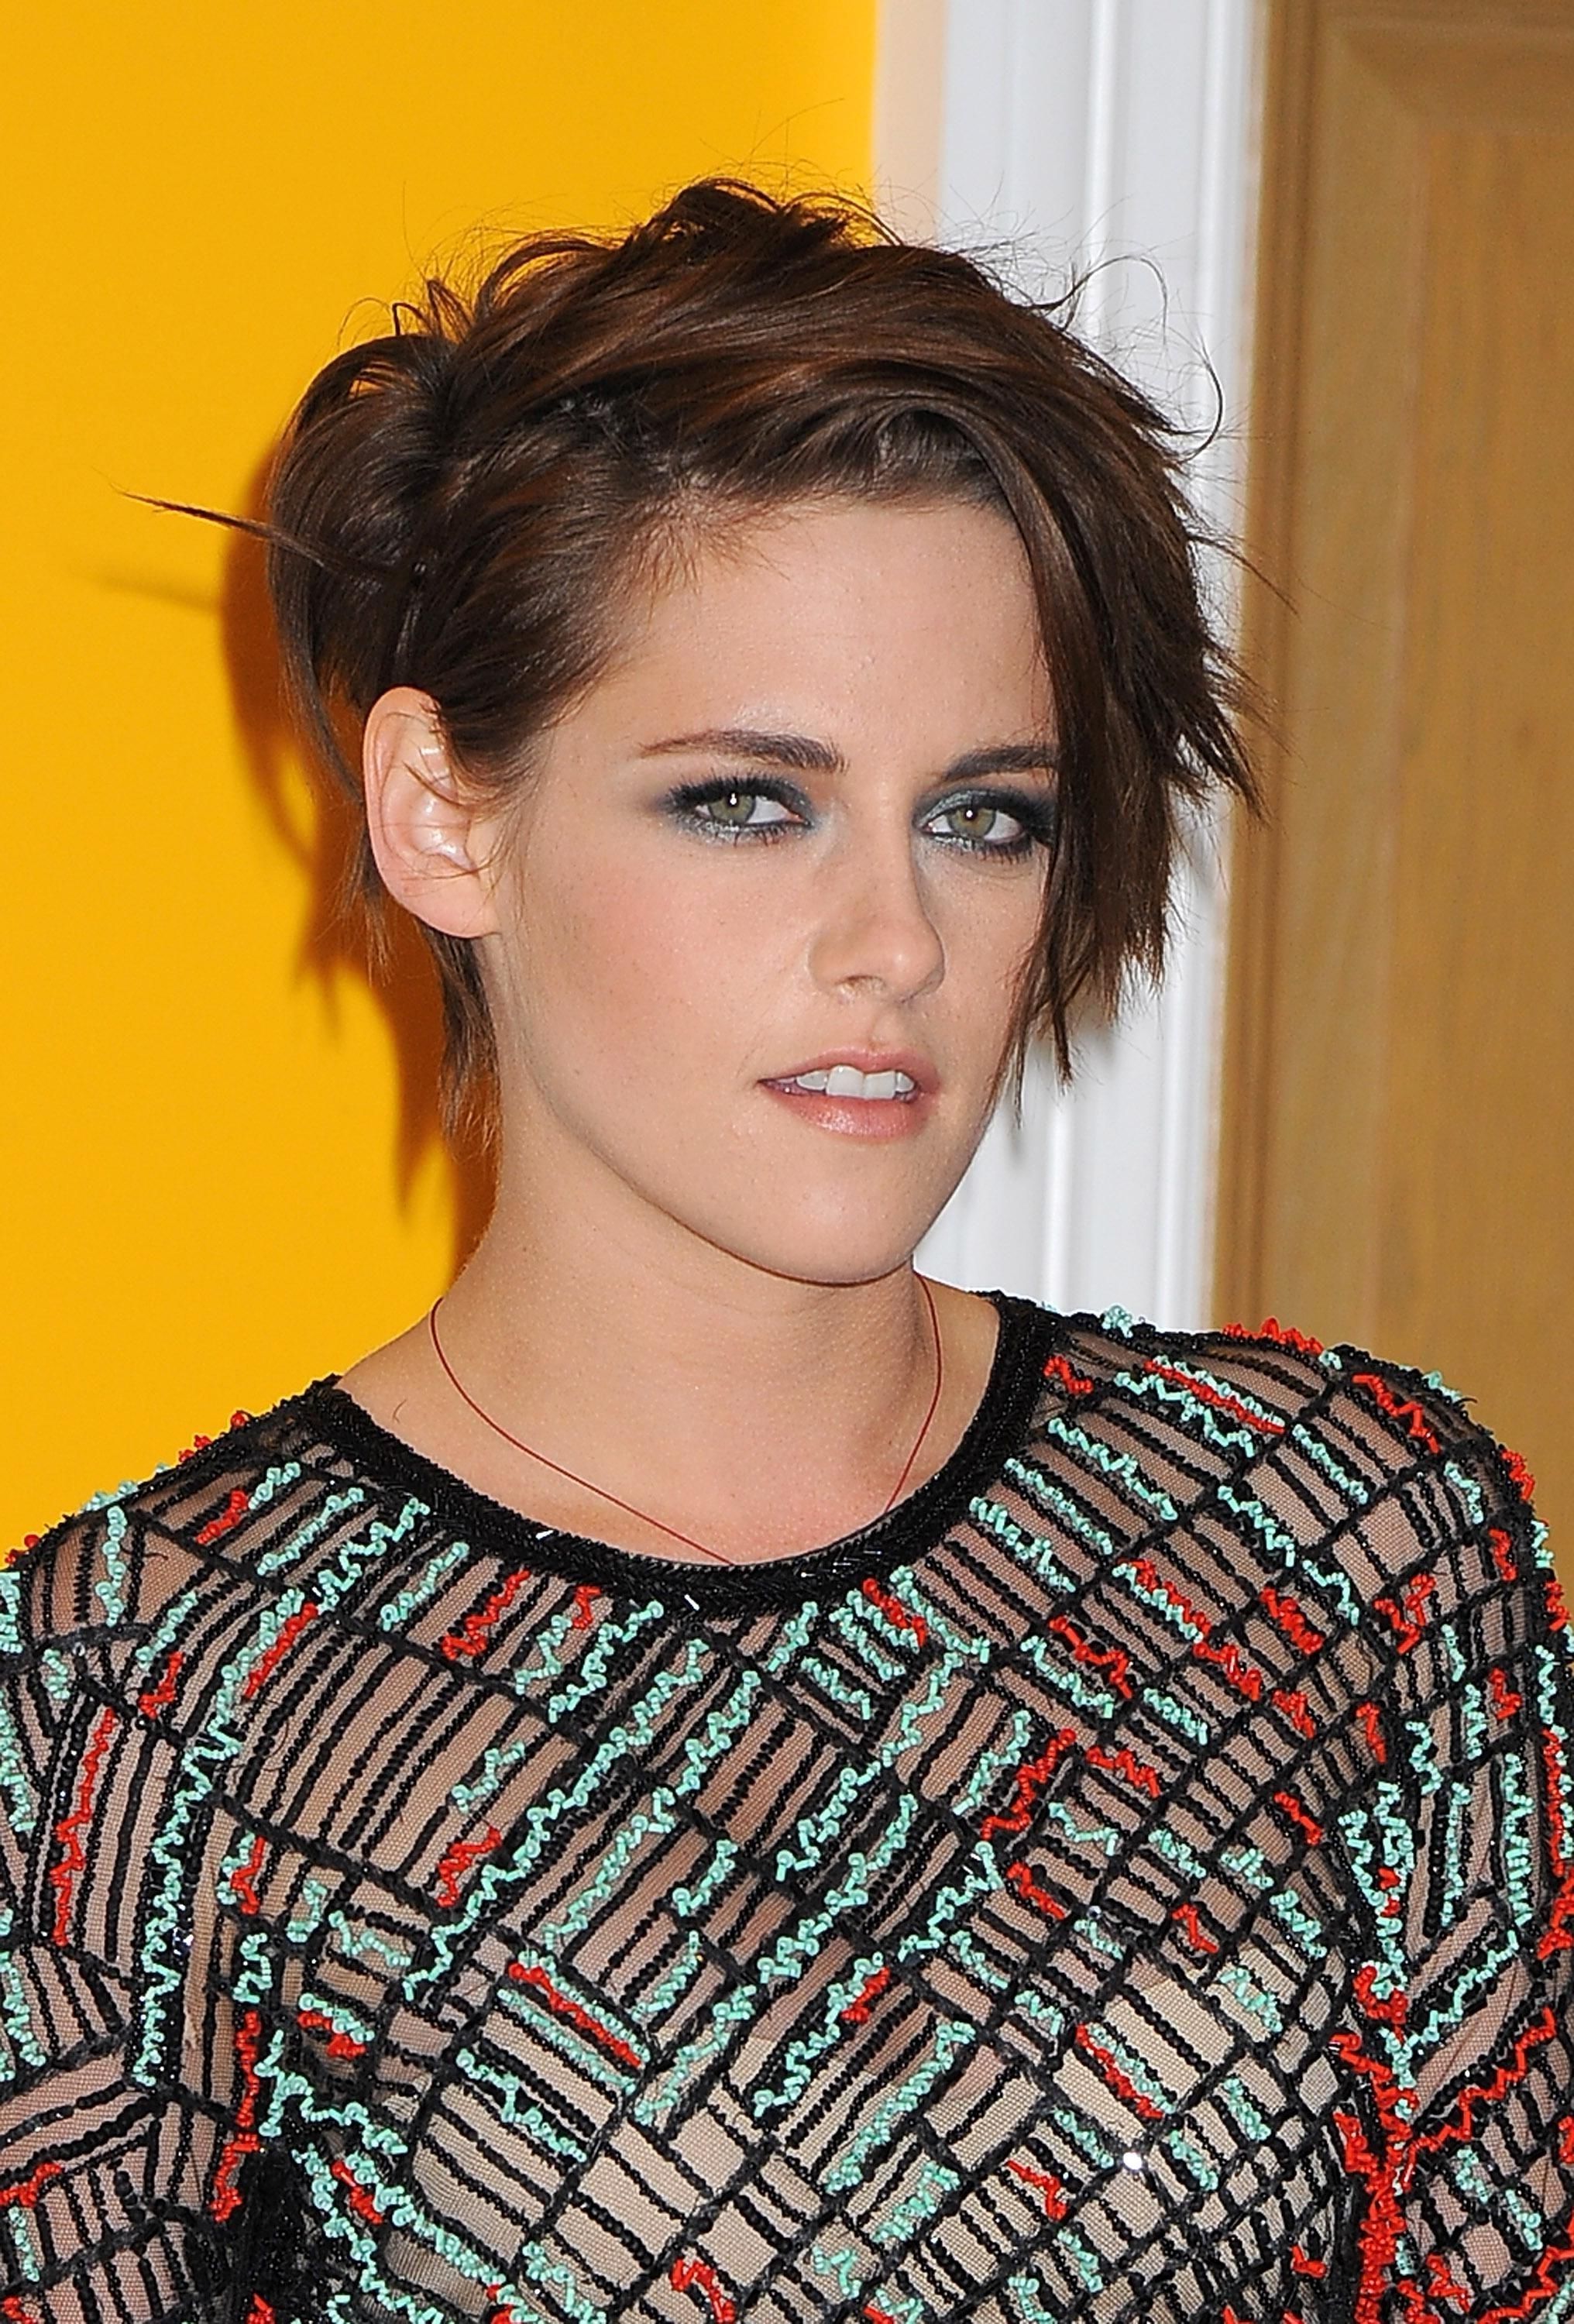 Best And Newest Rocker Pixie Hairstyles In Get Kristen Stewart's Sultry Makeup And Stylish Pixie (View 18 of 20)